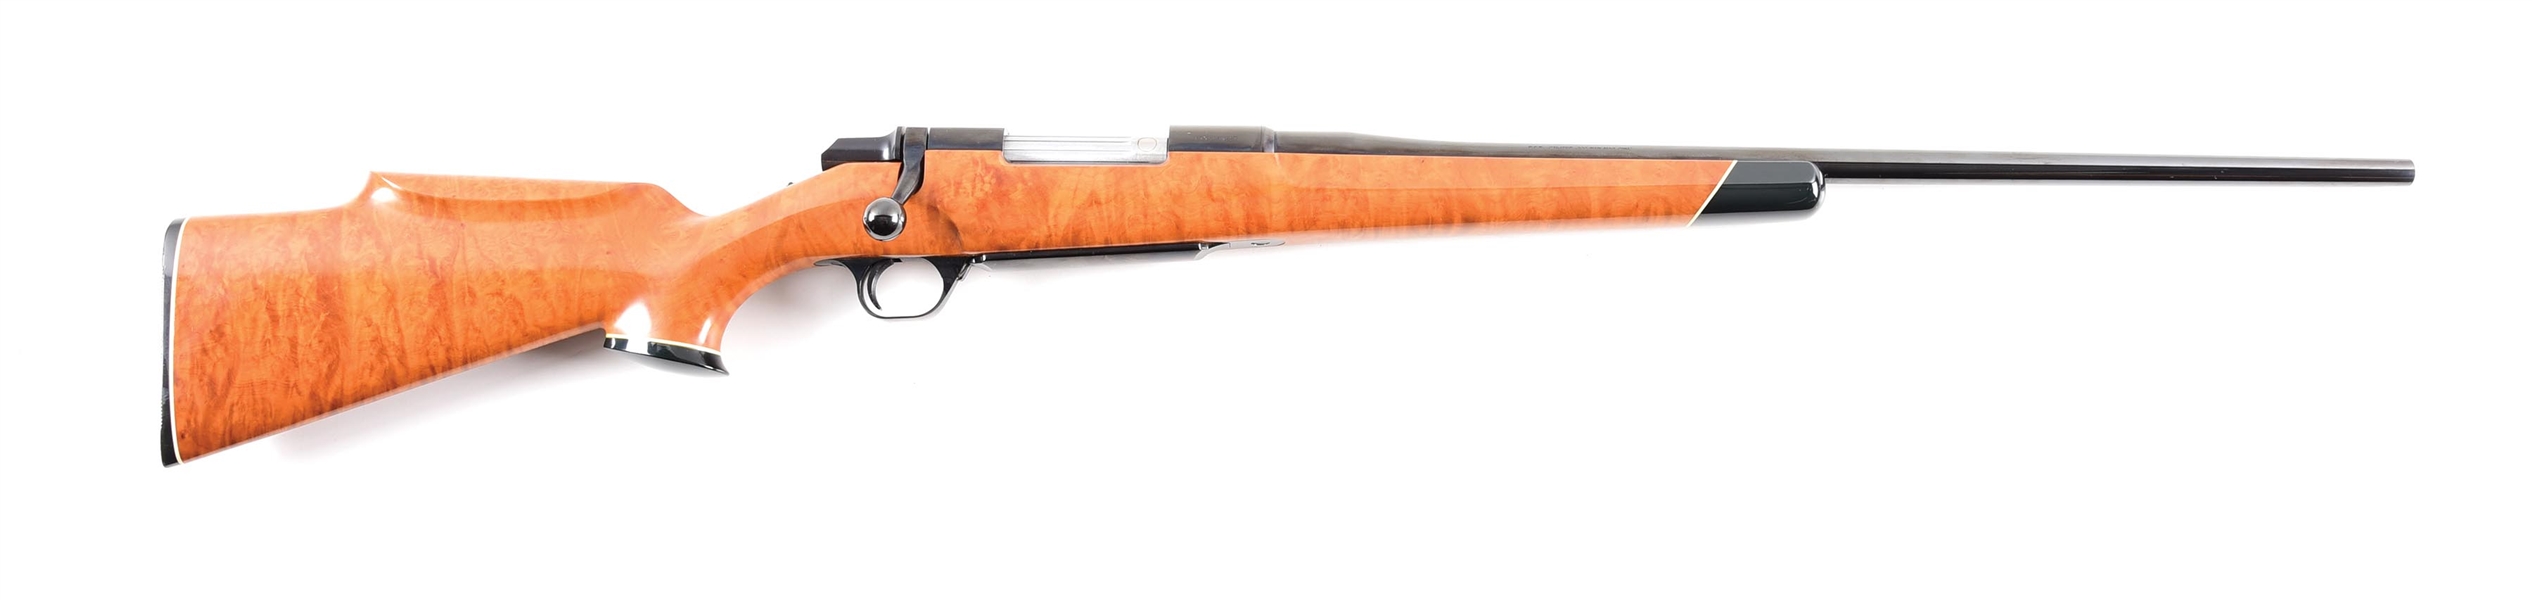 (M) BROWNING BBR BOLT ACTION RIFLE WITH MADRONE (ARBUTUS MENZIESII) STOCK.